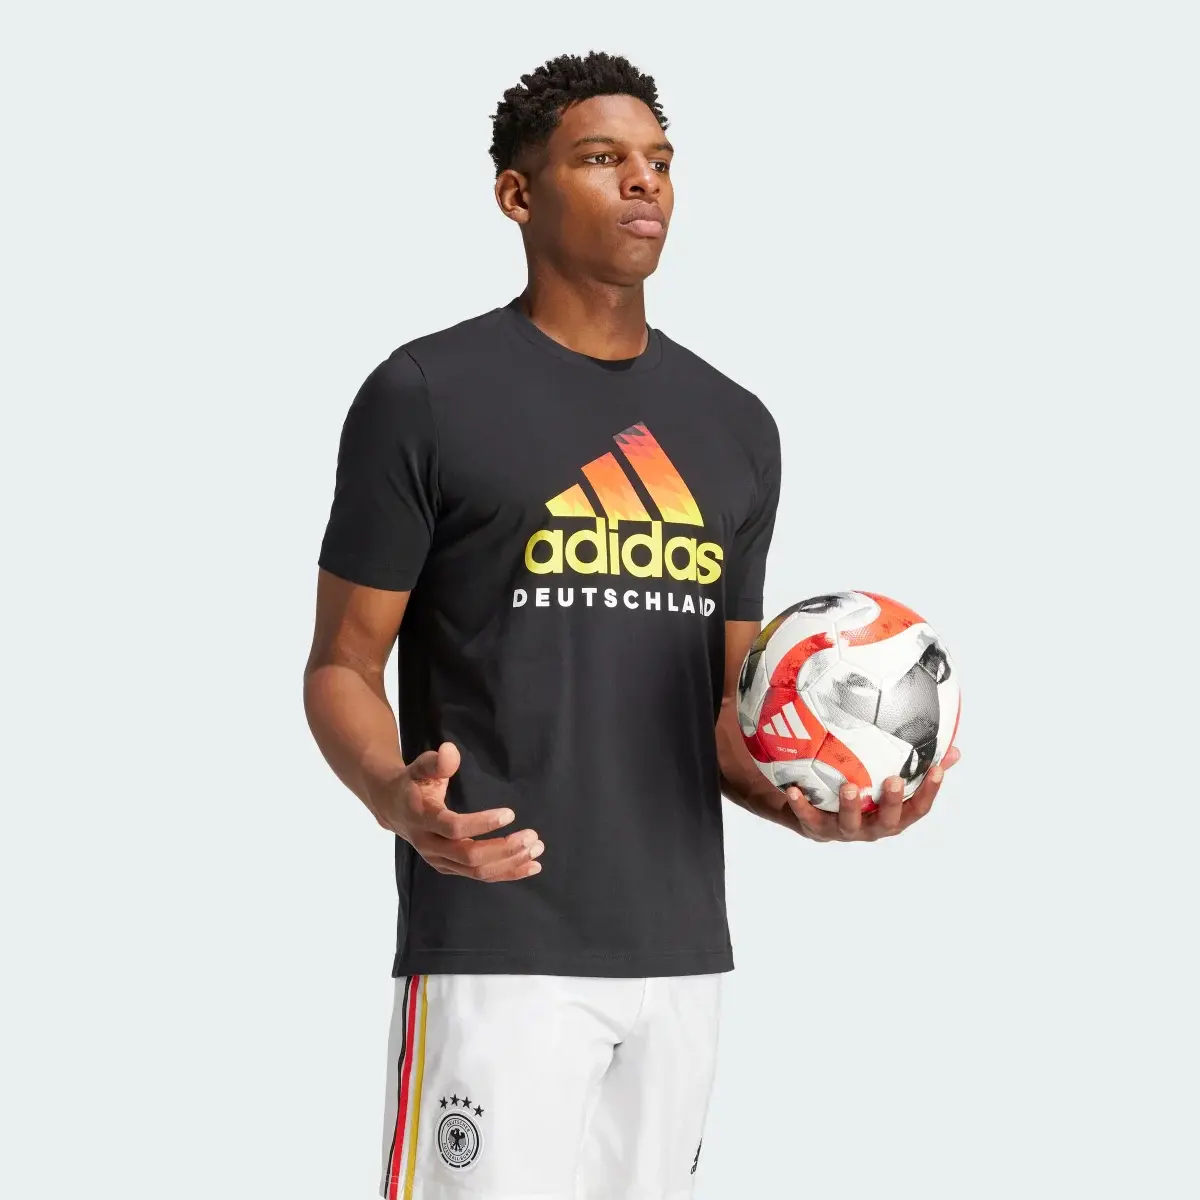 Adidas Germany DNA Graphic T-Shirt. 3